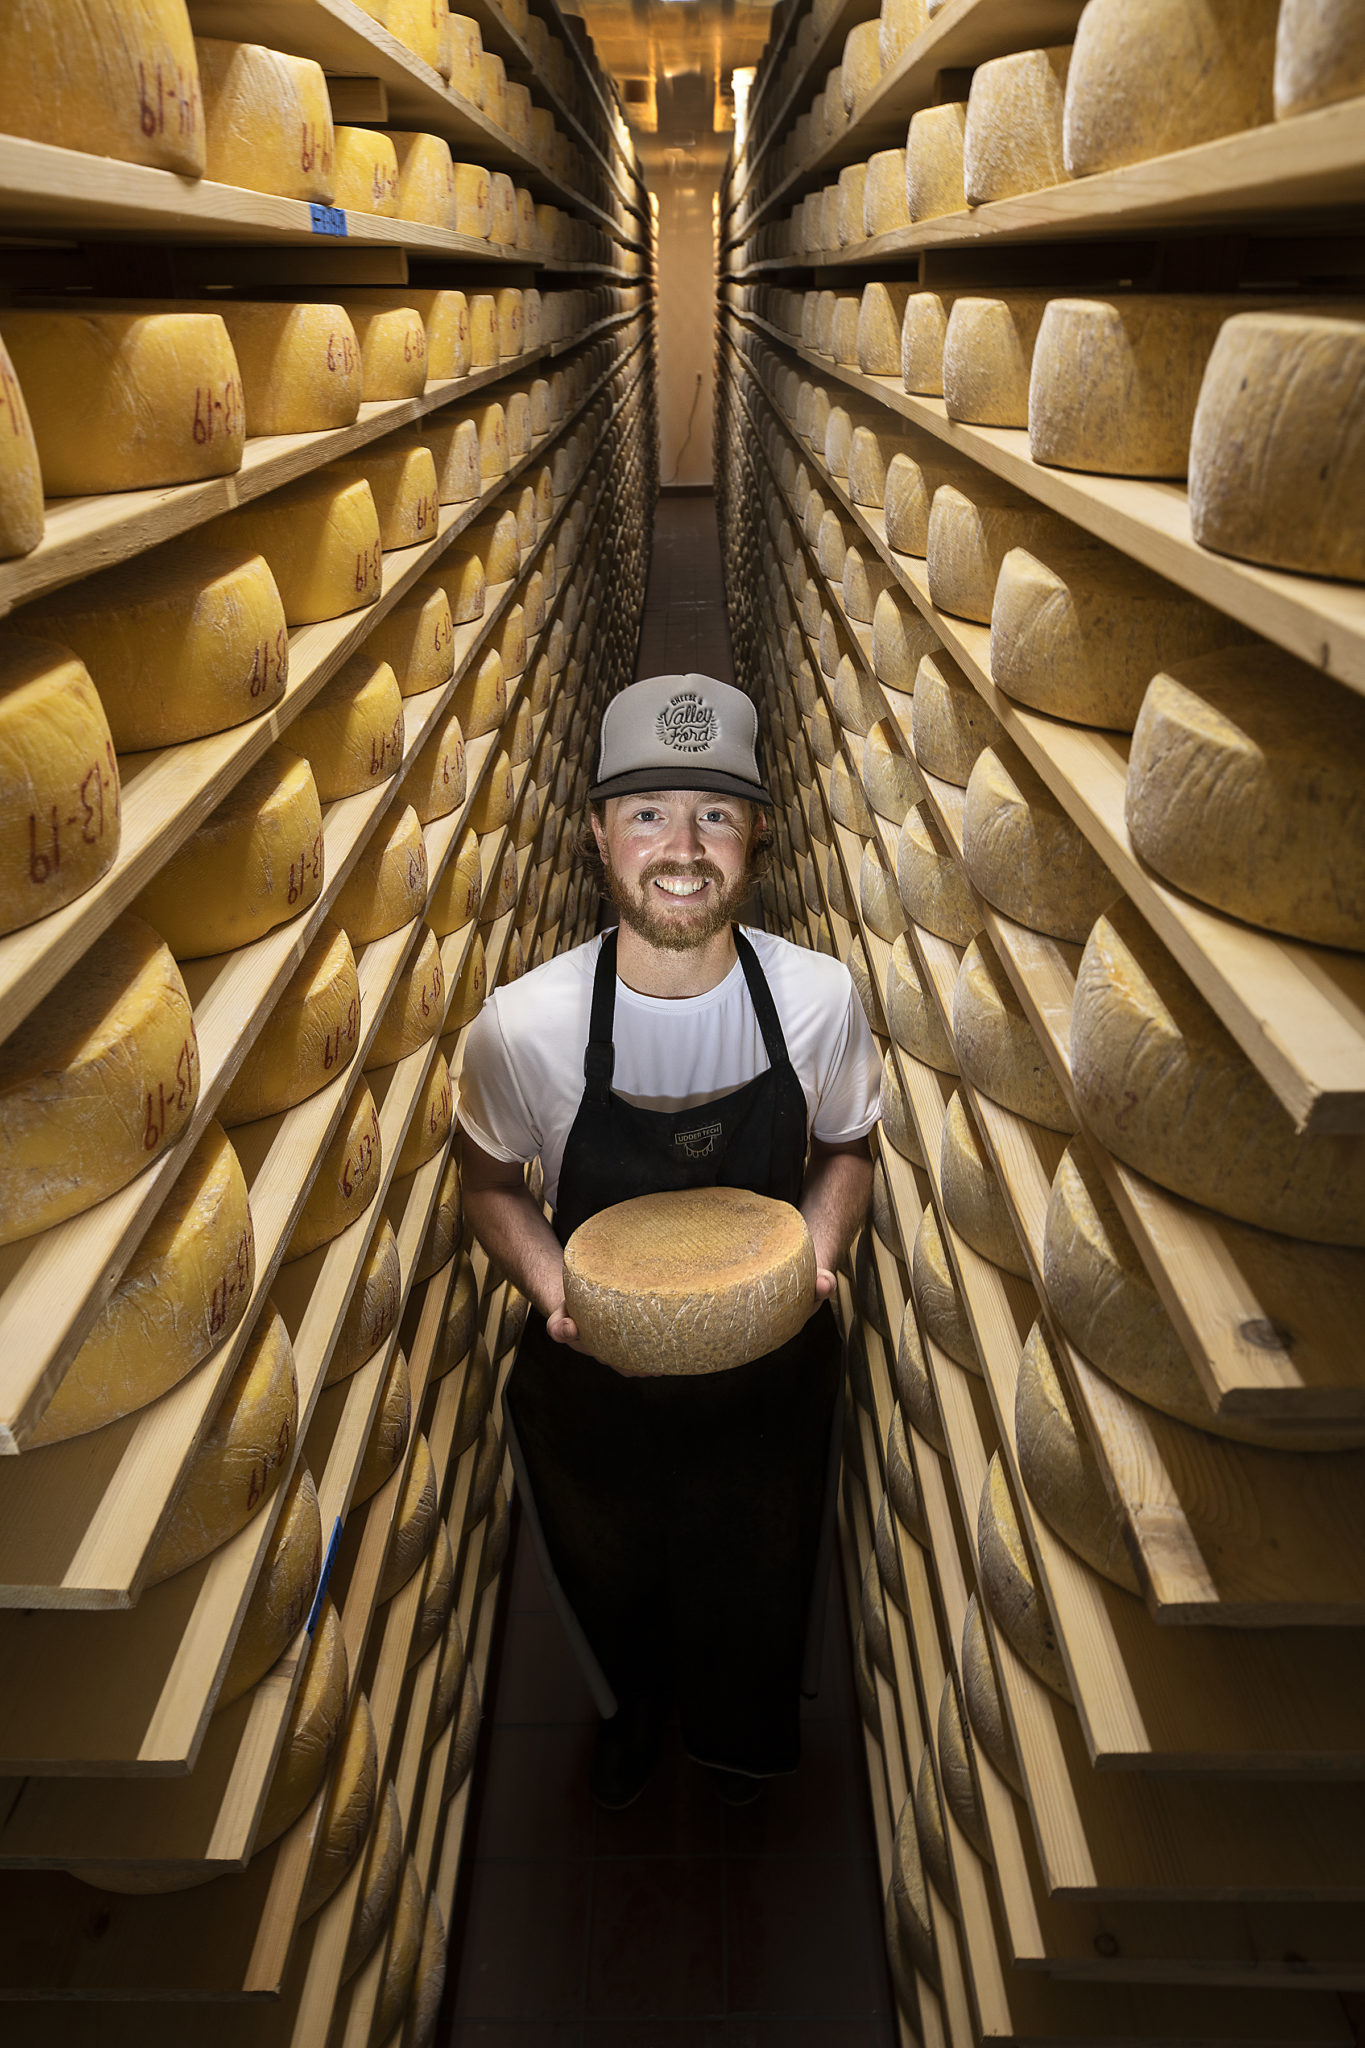 Cheese maker Joe Moreda in the aging room at the Valley Ford Cheese & Creamery. (photo by John Burgess/Sonoma Magazine)